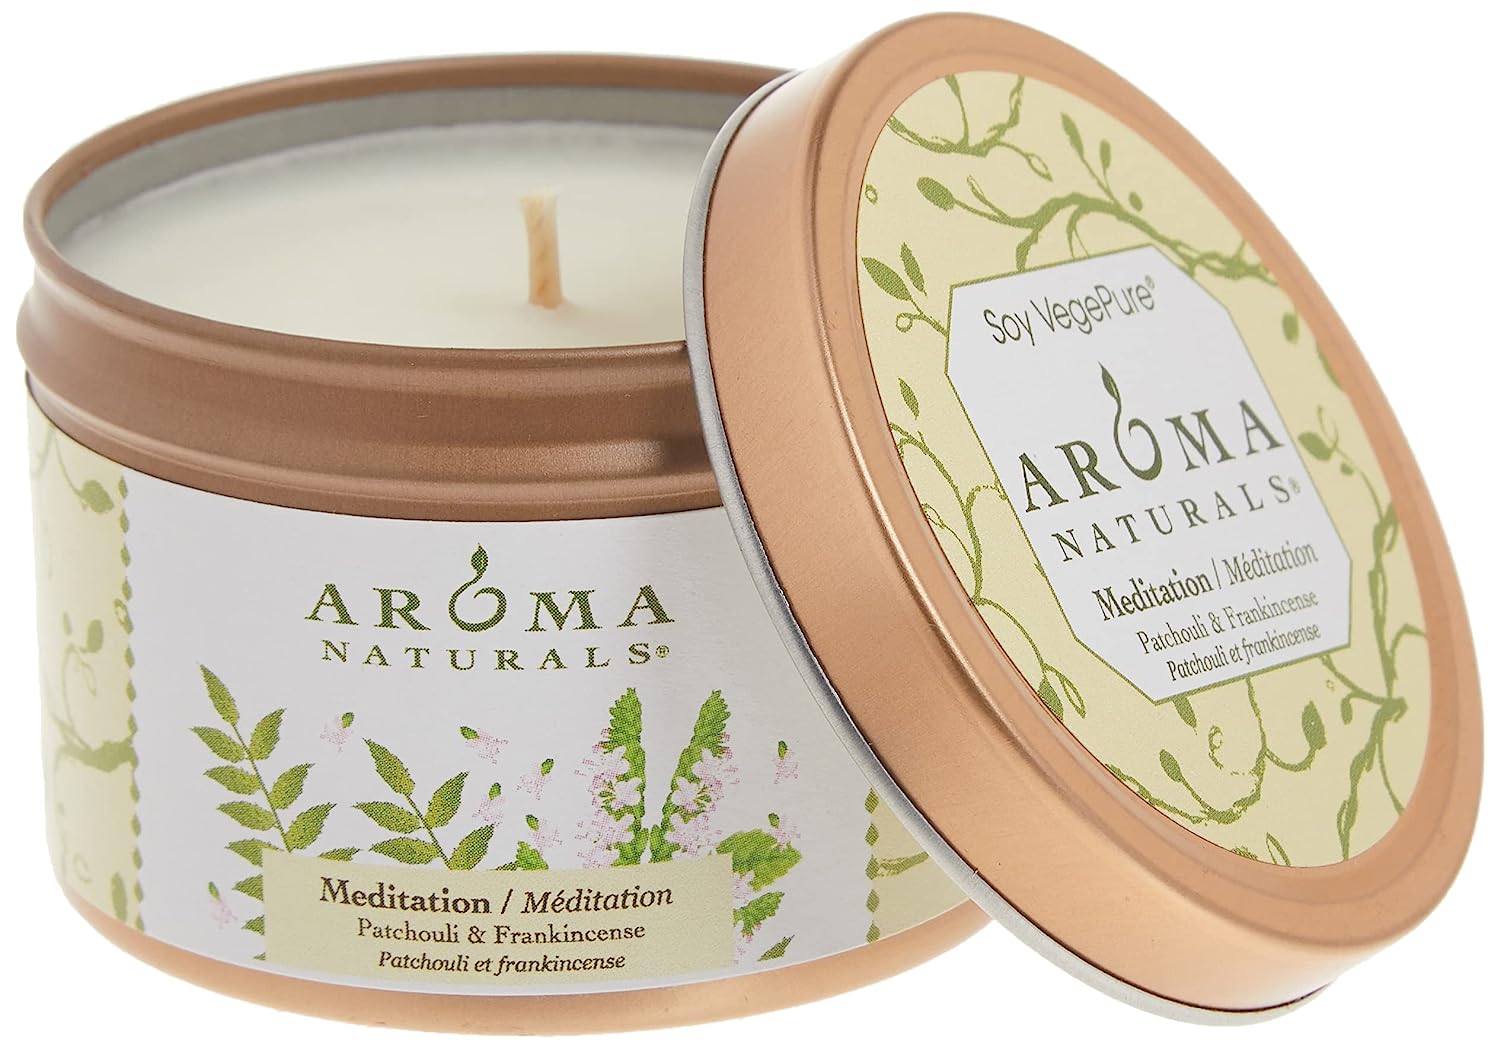 Aroma Naturals Tin Candle with Patchouli and Frankincense Essential Oil Natural Soy Scented, Meditation, 2 Count - image 1 of 6